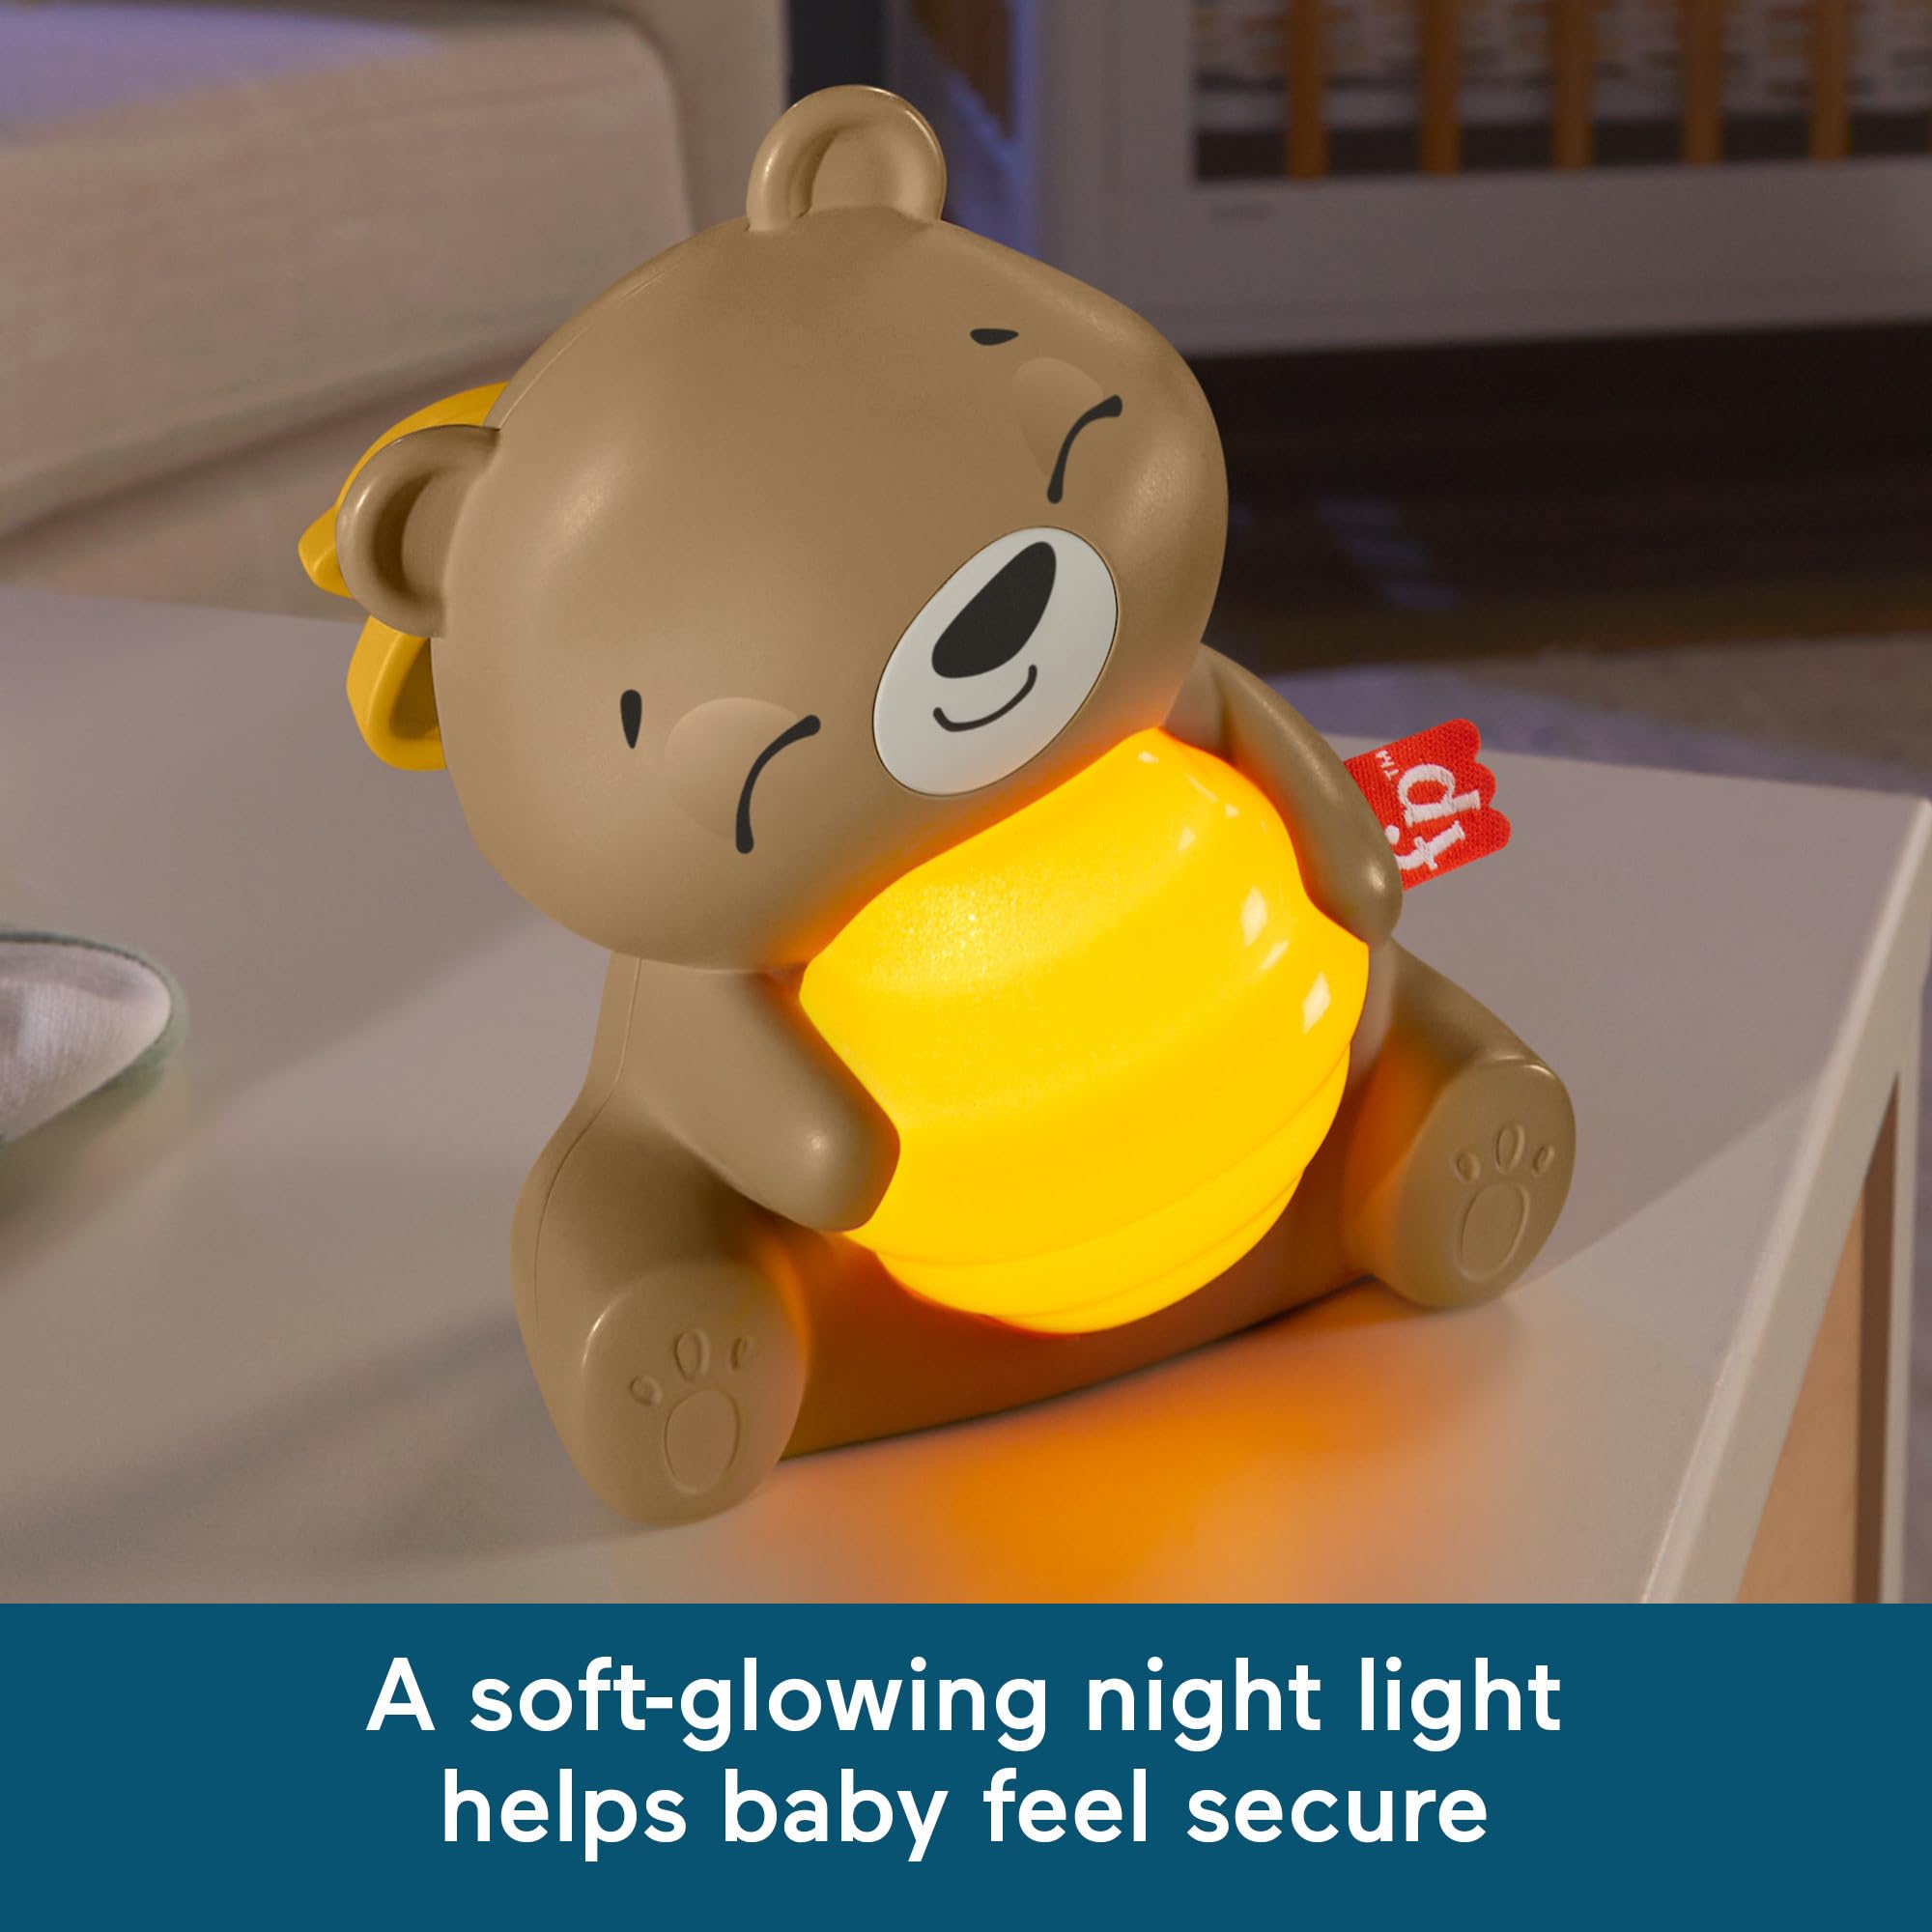 Fisher-Price Baby Beary Soothing Portable Baby Sound Machine with Night Light & Customizable Timer for Newborns